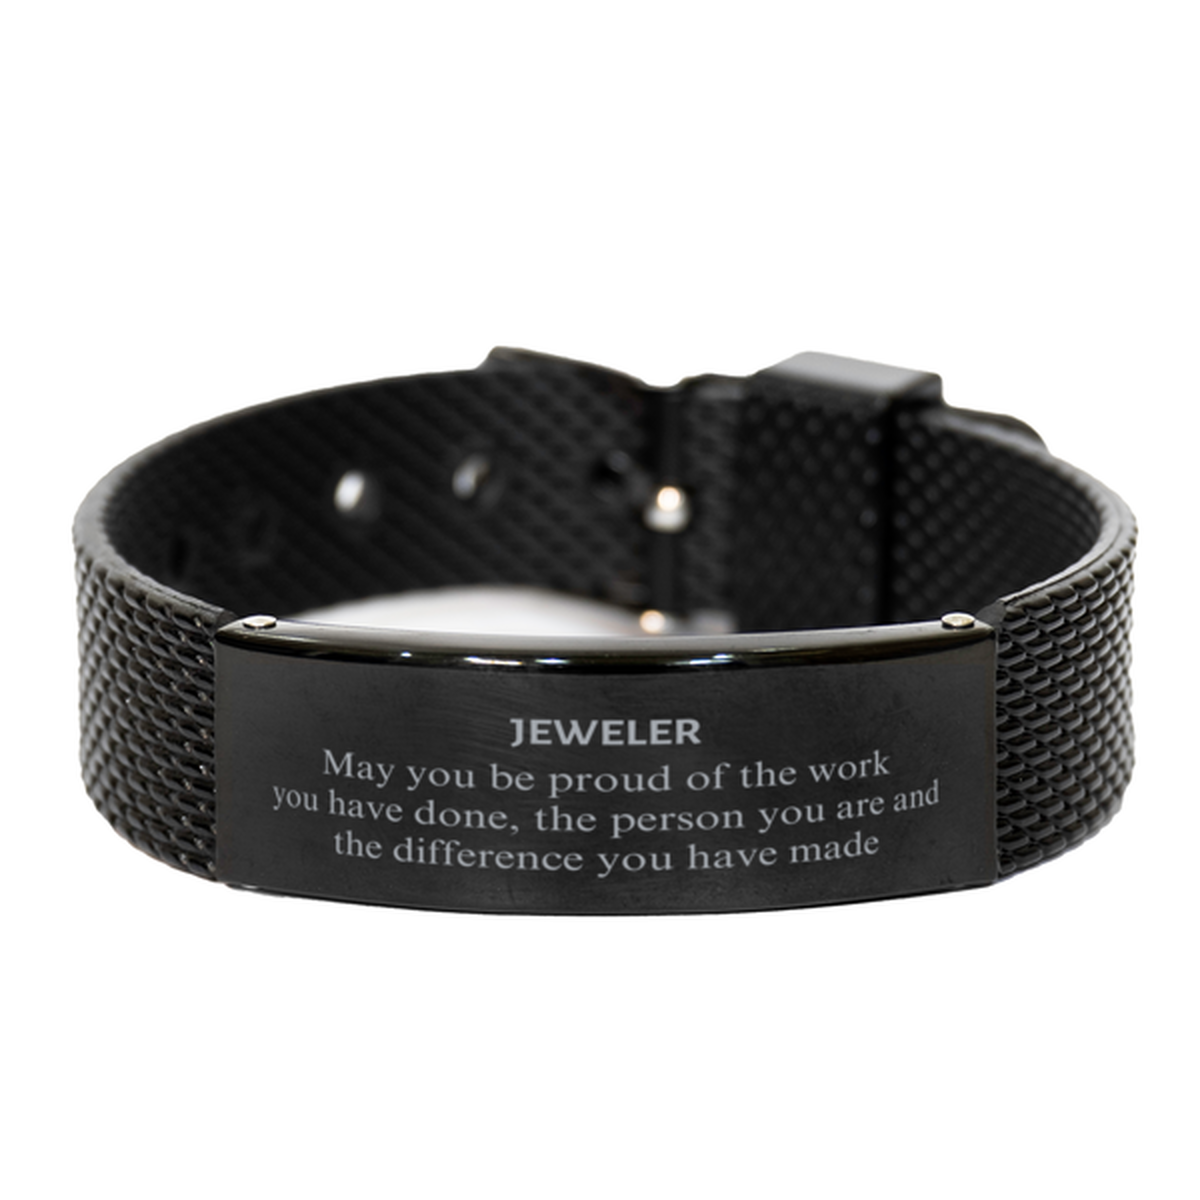 Jeweler May you be proud of the work you have done, Retirement Jeweler Black Shark Mesh Bracelet for Colleague Appreciation Gifts Amazing for Jeweler